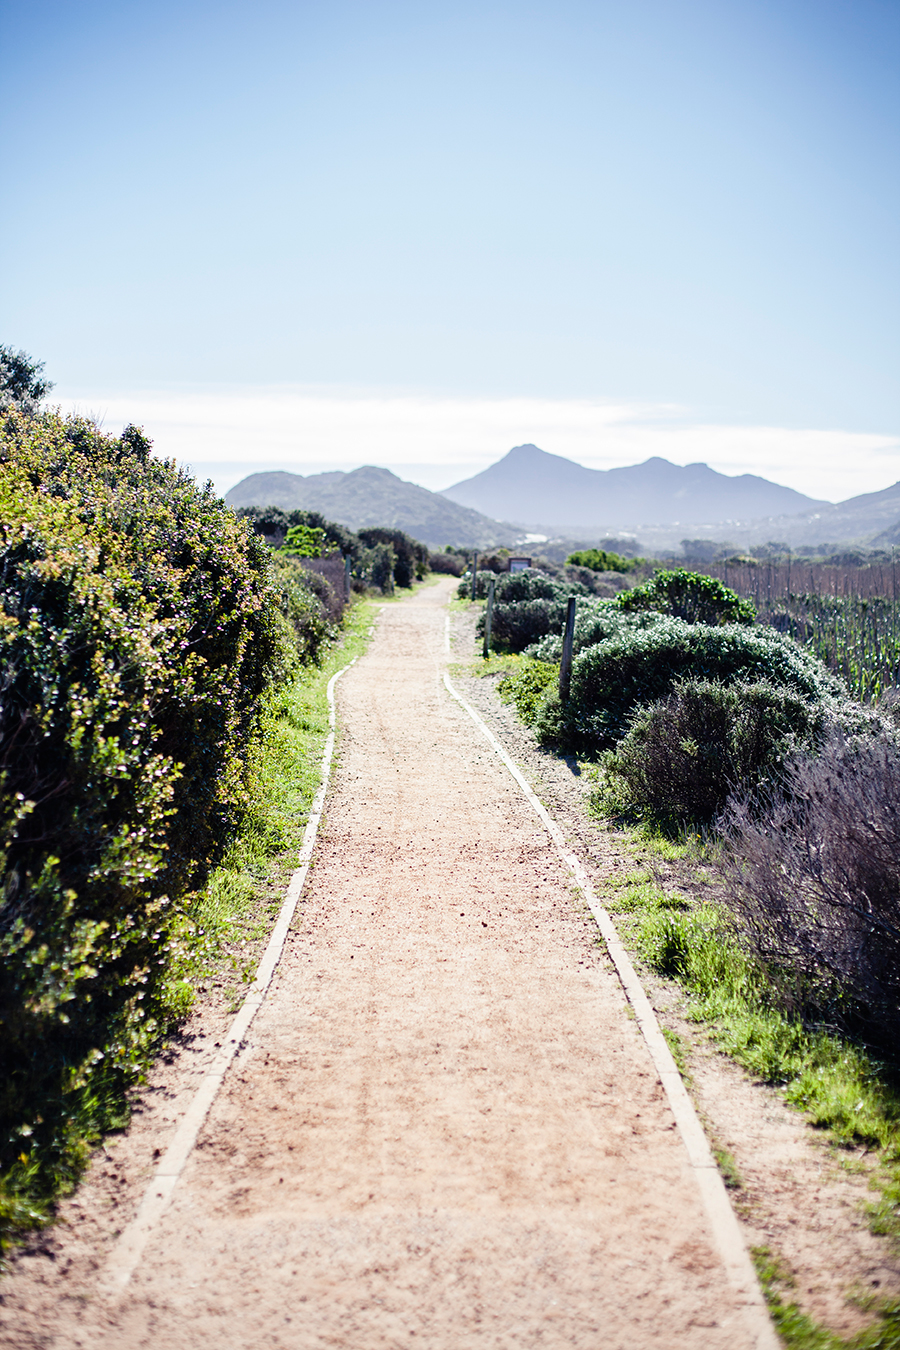 Trail at the Silvermine Wetland Conservation Area, Fish Hoek, Cape Town, South Africa.